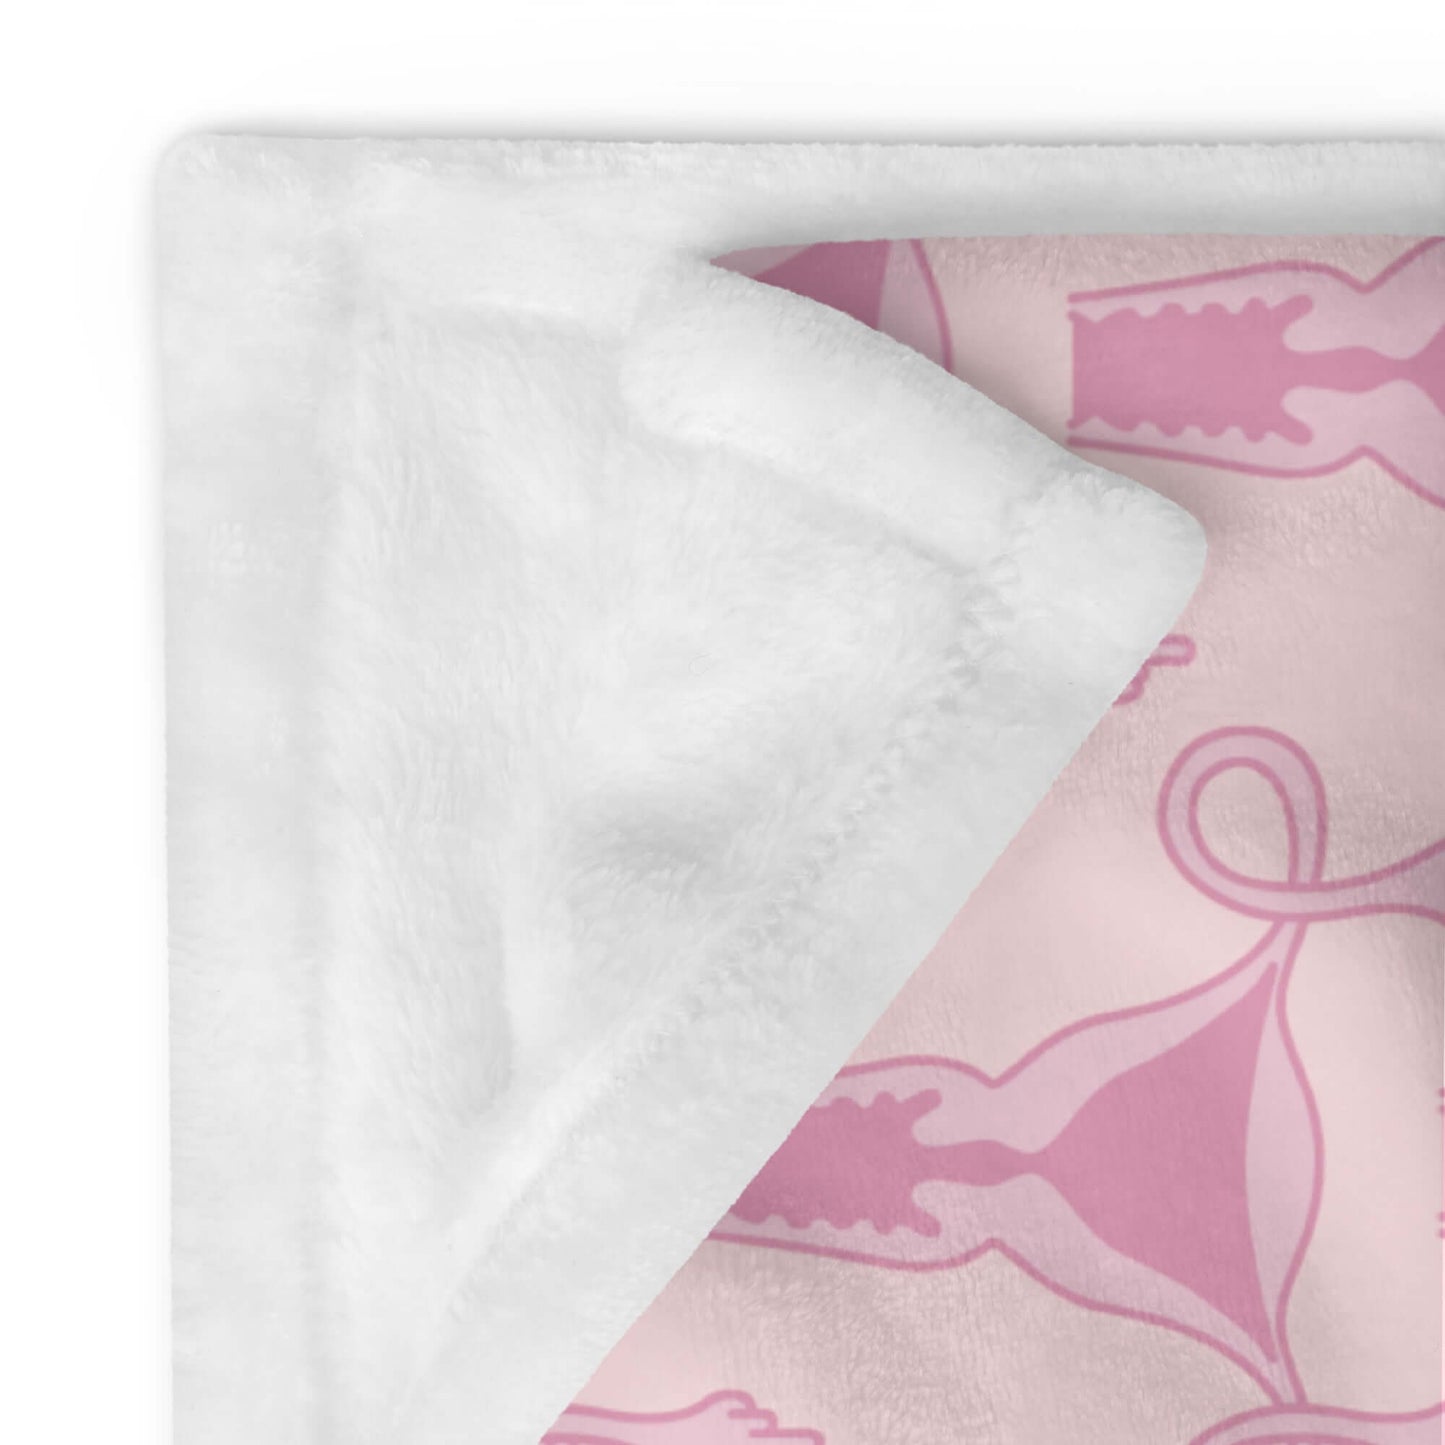 Angry uterus reproductive rights middle finger throw blanket